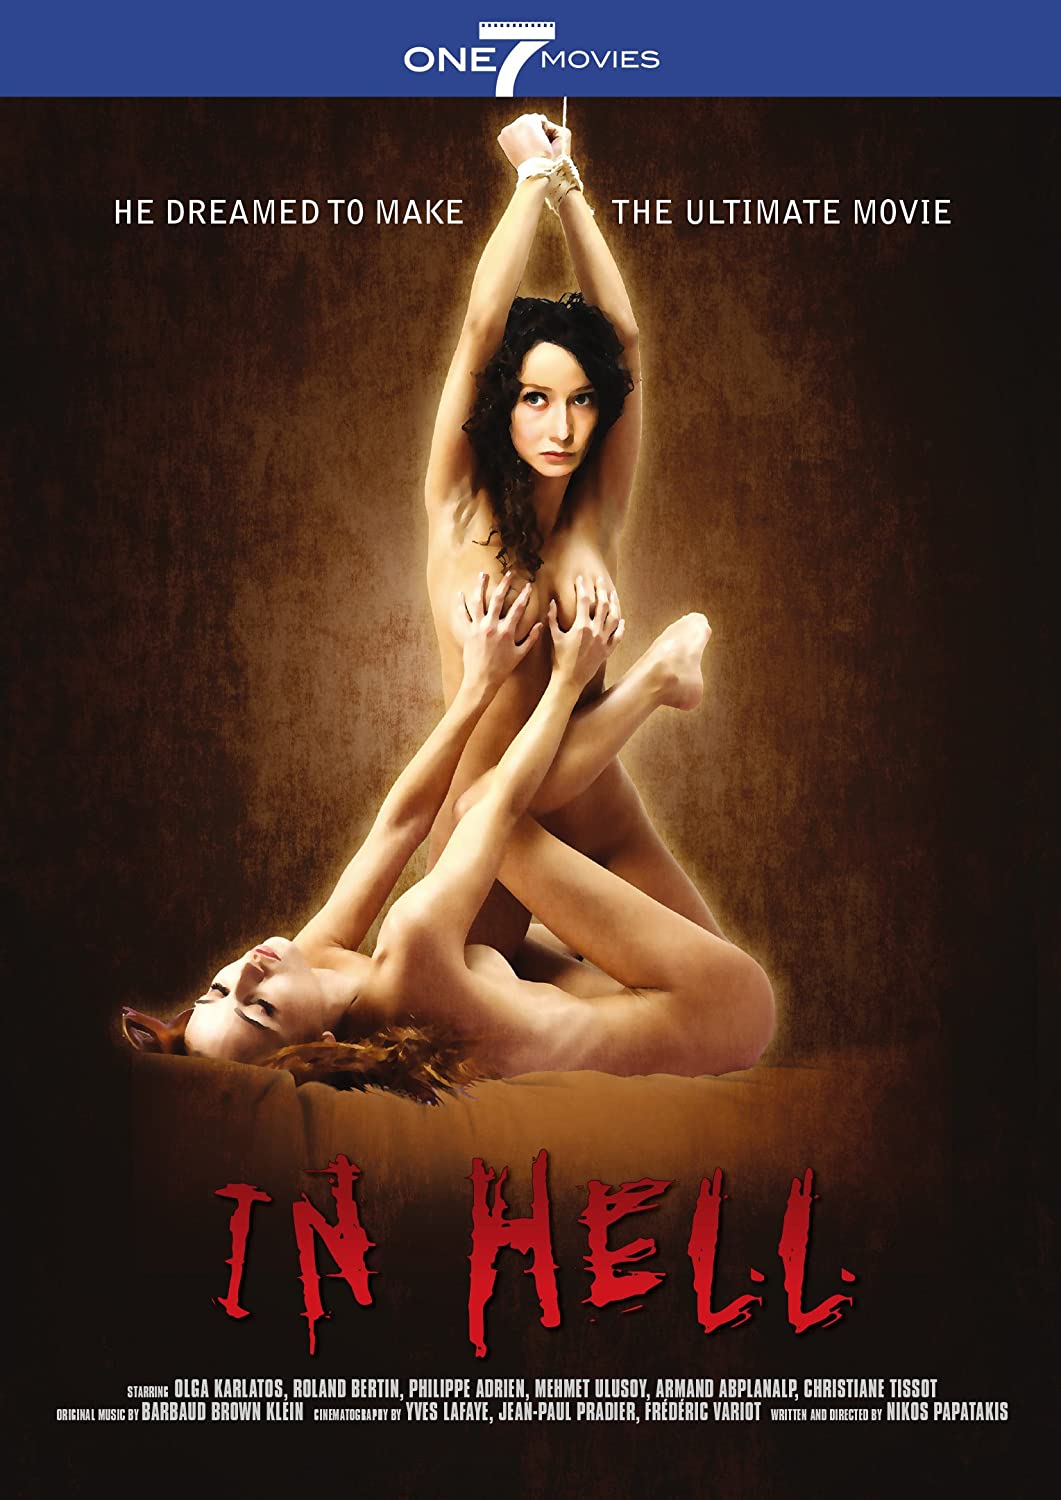 IN HELL DVD